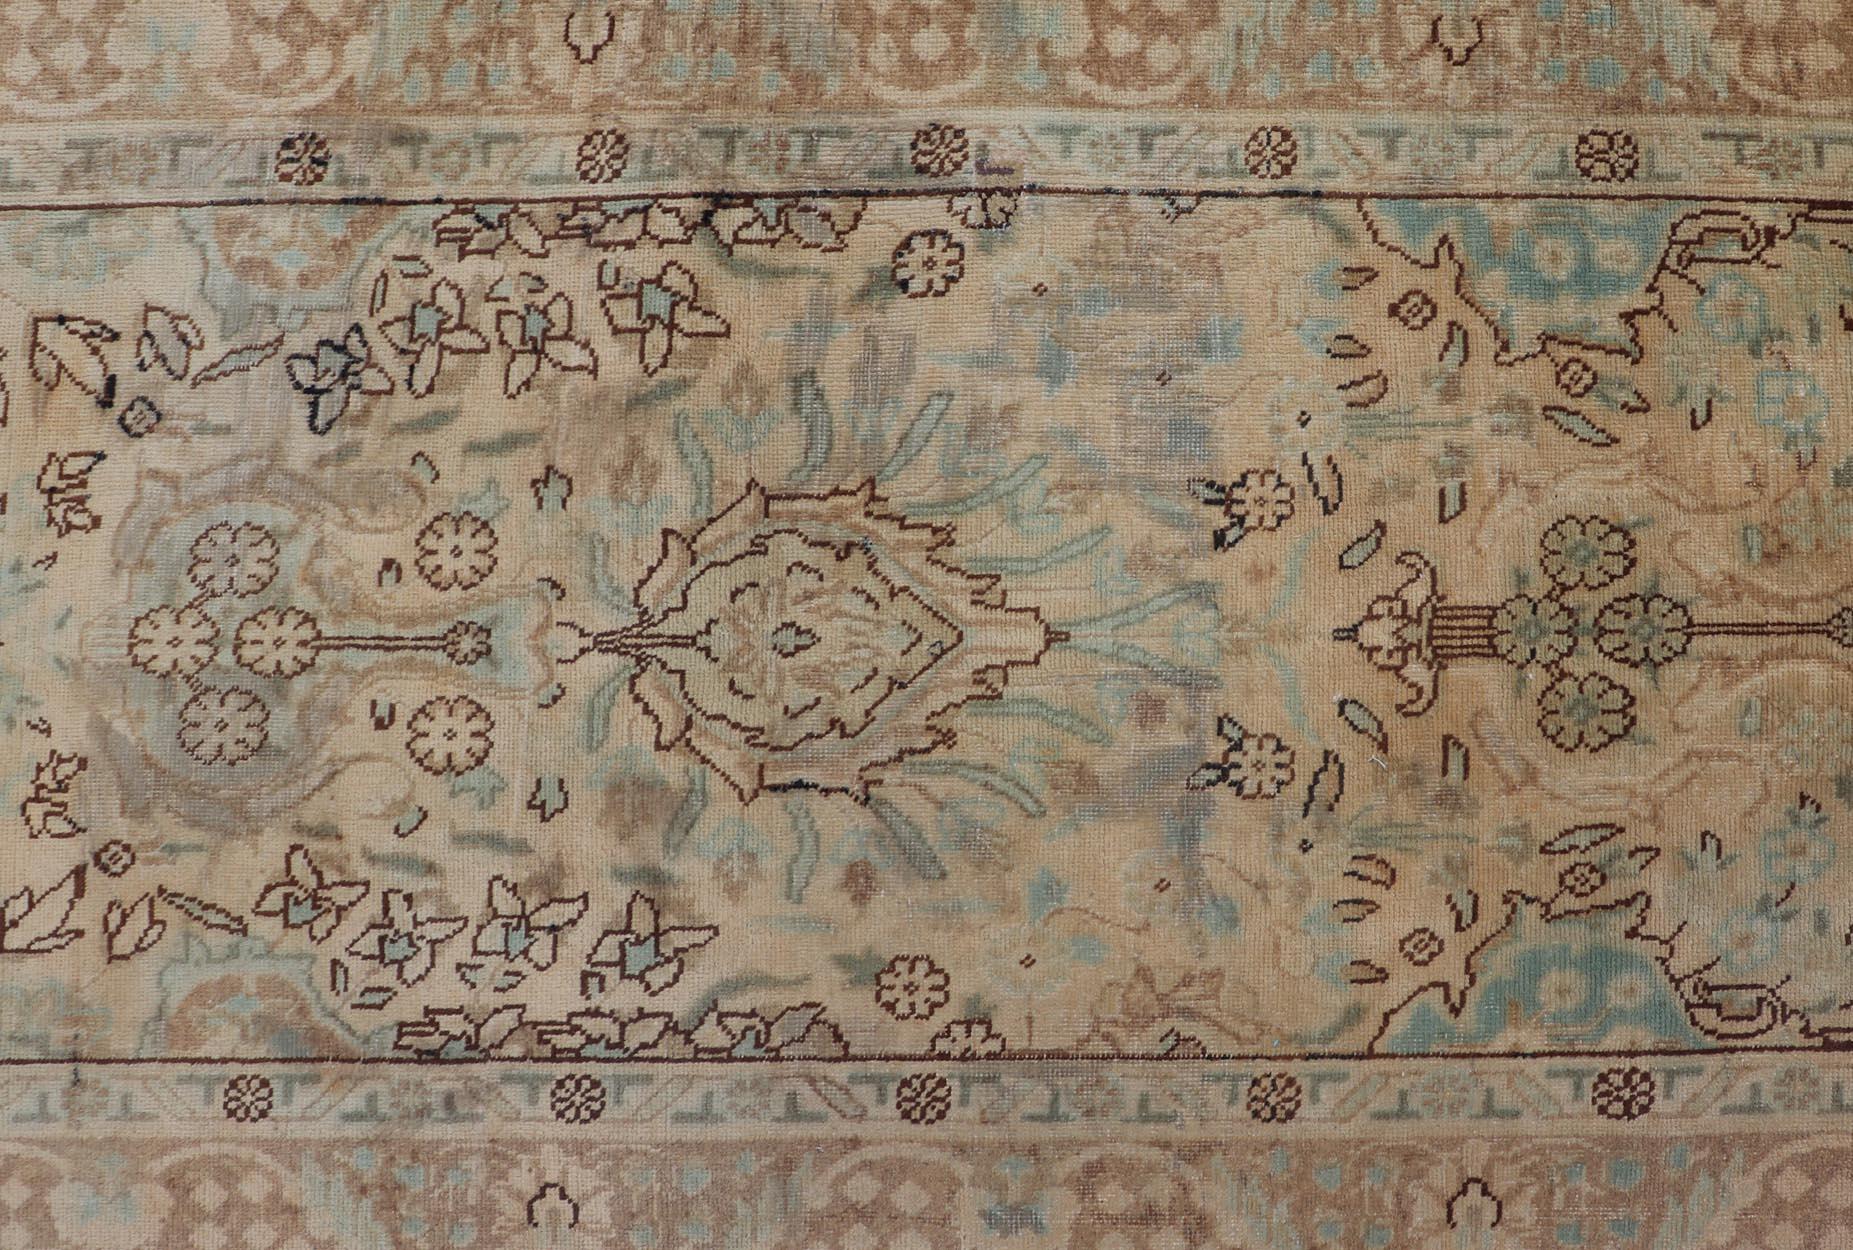 Floral design vintage Persian Tabriz long runner in neutral tones of taupe, tan, brown, taupe, gray, light blue and dark blue. Keivan Woven Arts / rug H-102-13, country of origin / type: Iran / Tabriz, circa 1950

This vintage Persian Tabriz